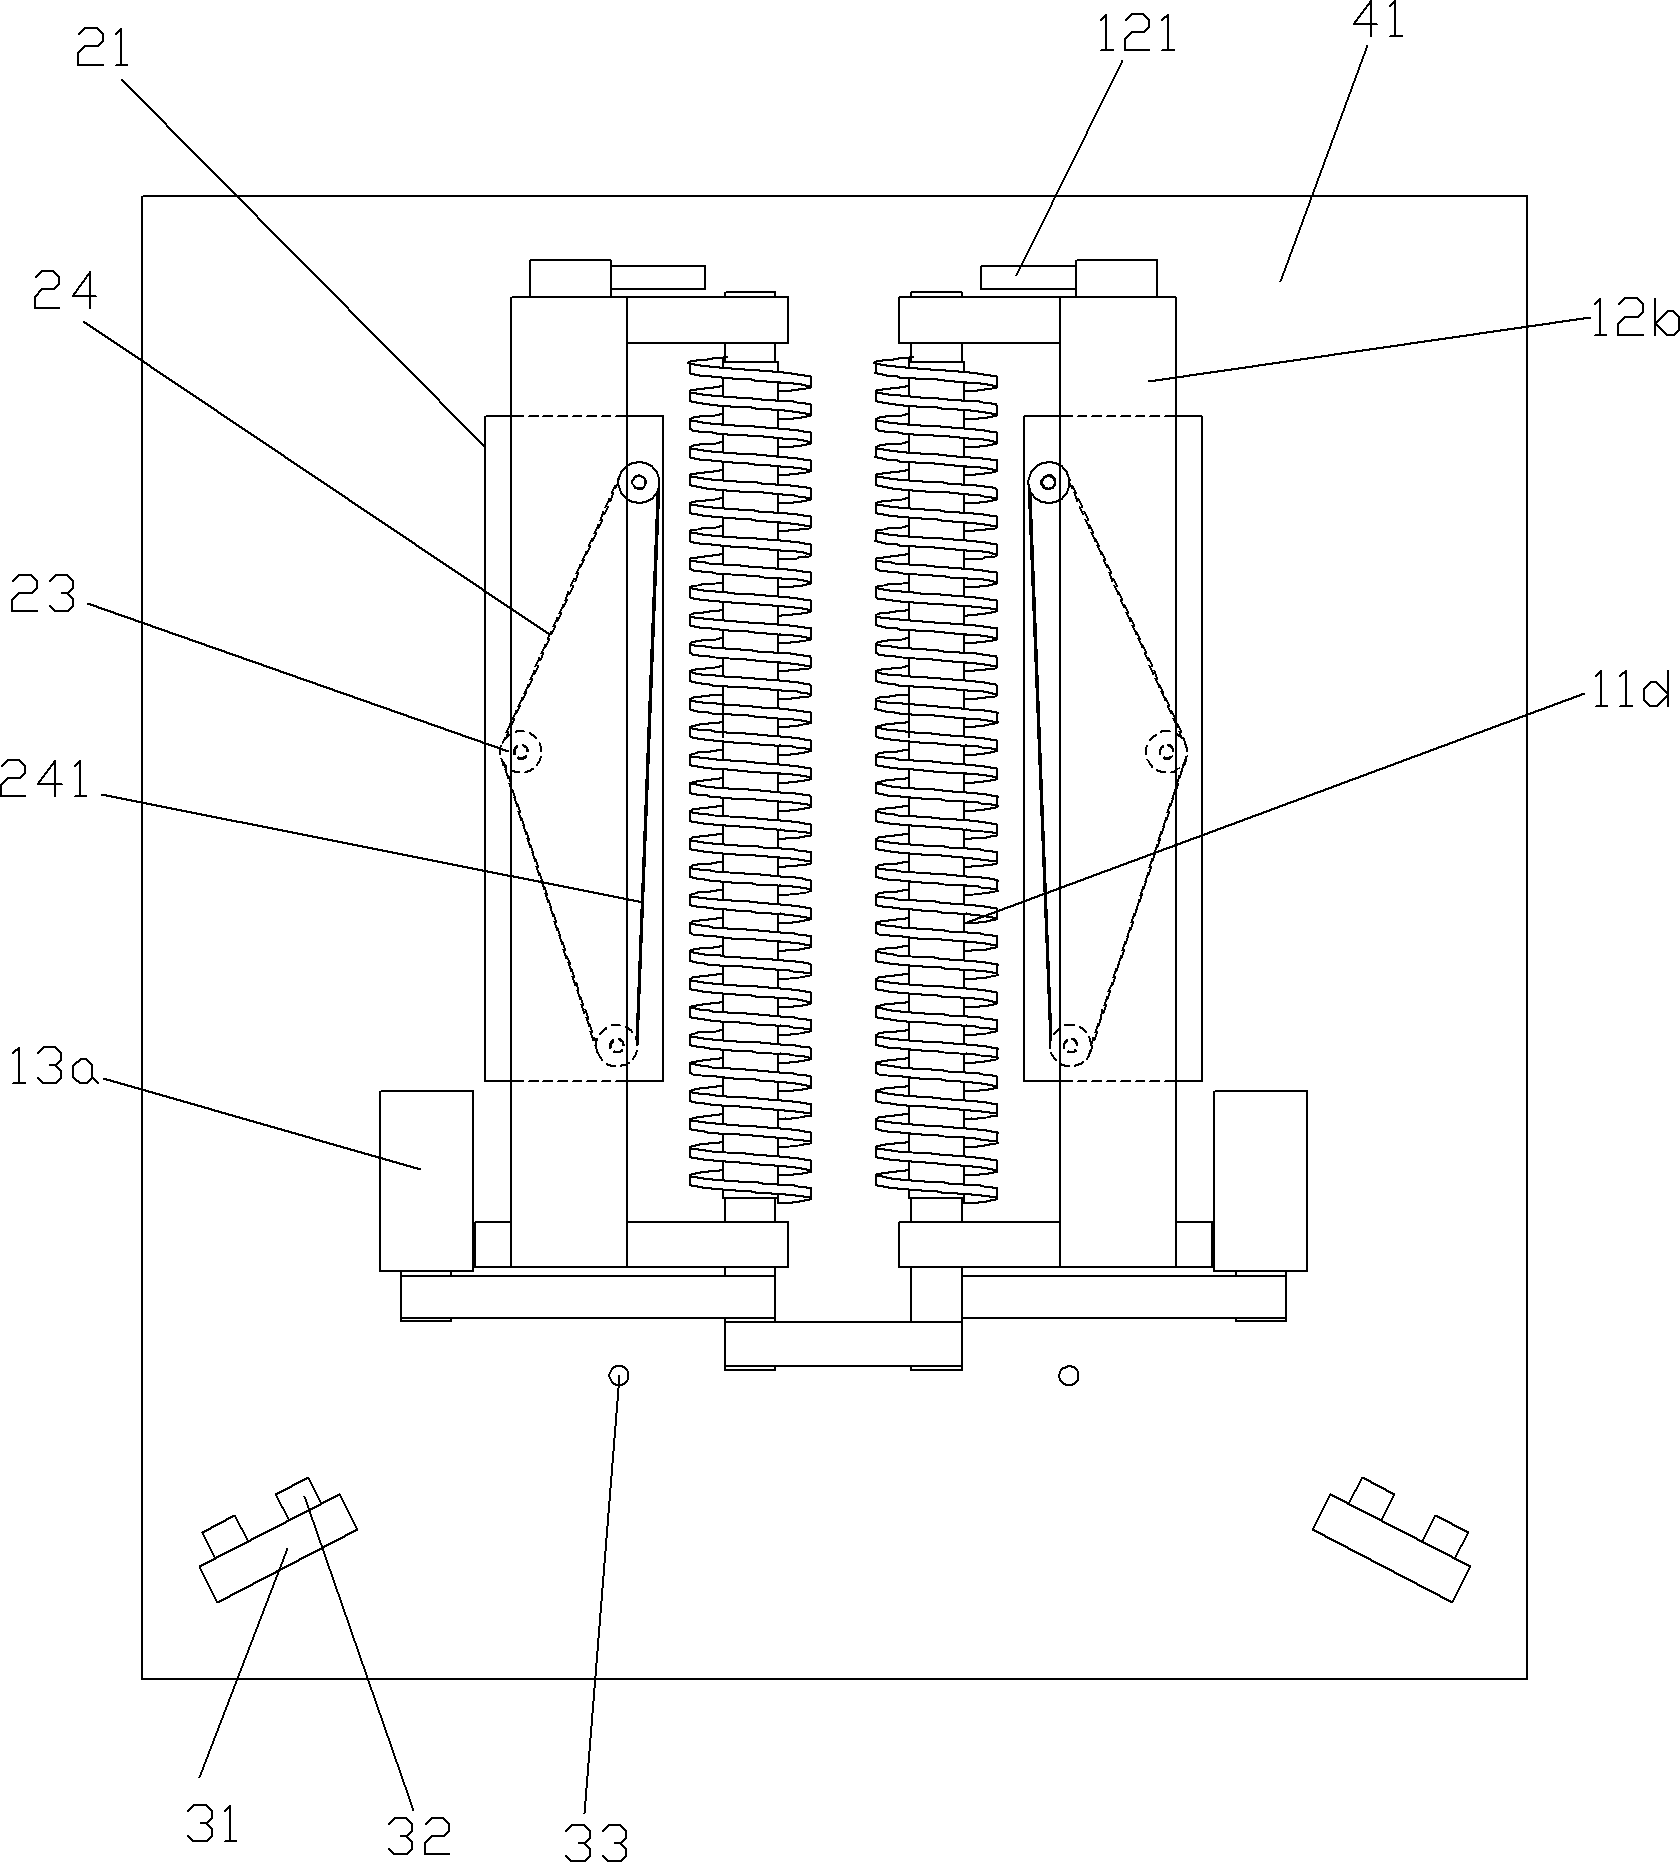 Automatic side-sticking equipment used during filter element production